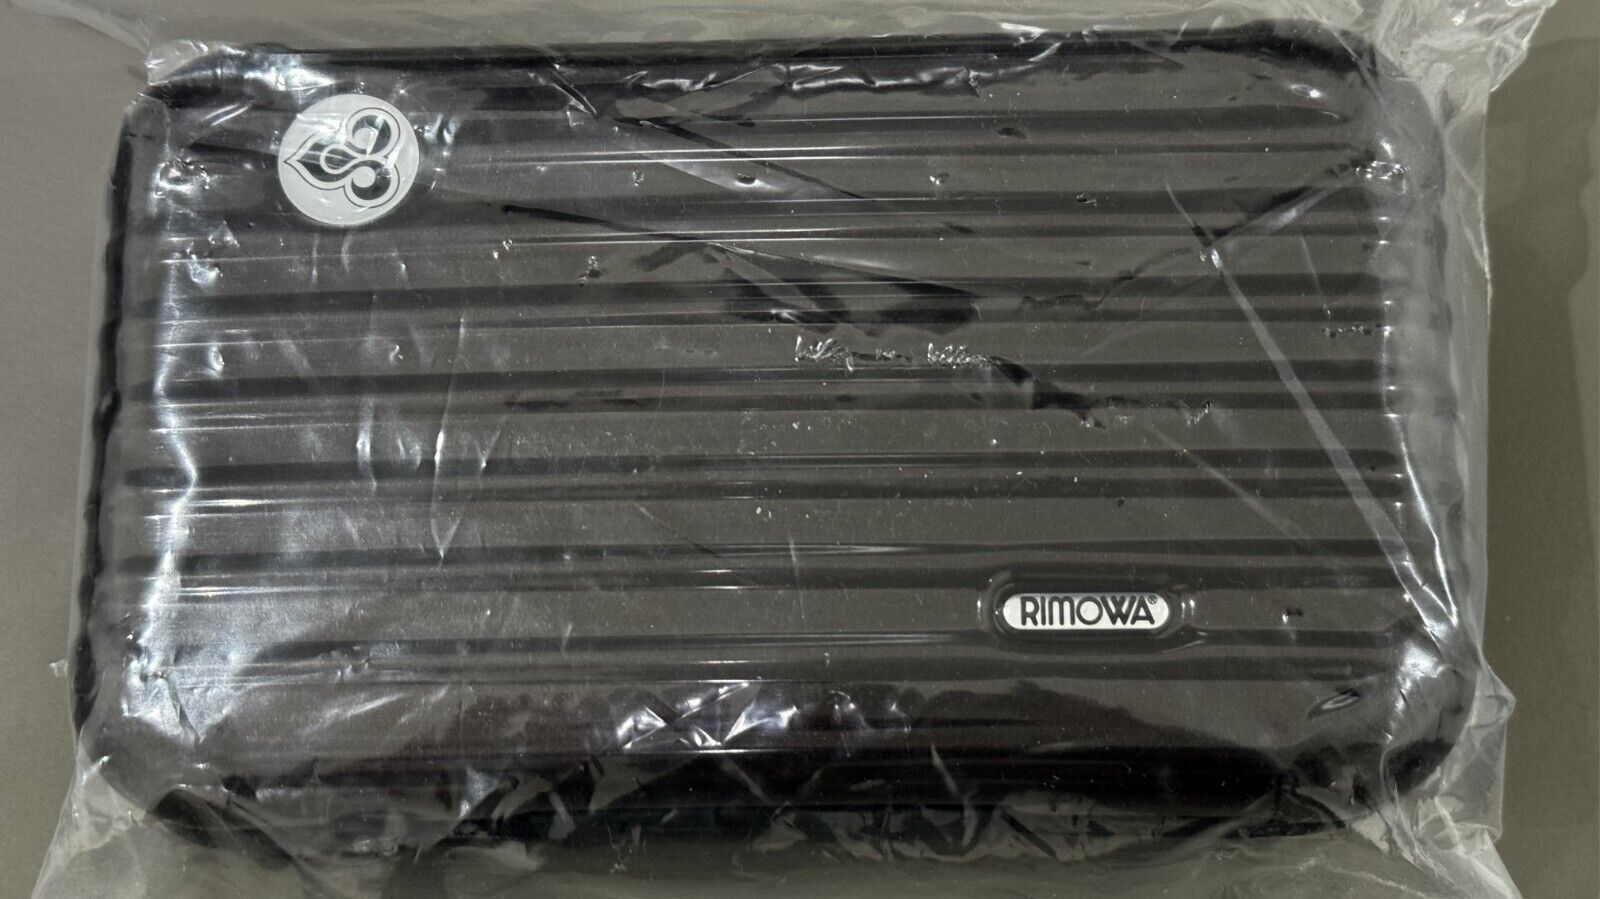 RIMOWA for Thai Airways First Class Travel Amenity Kit Brand New Sealed